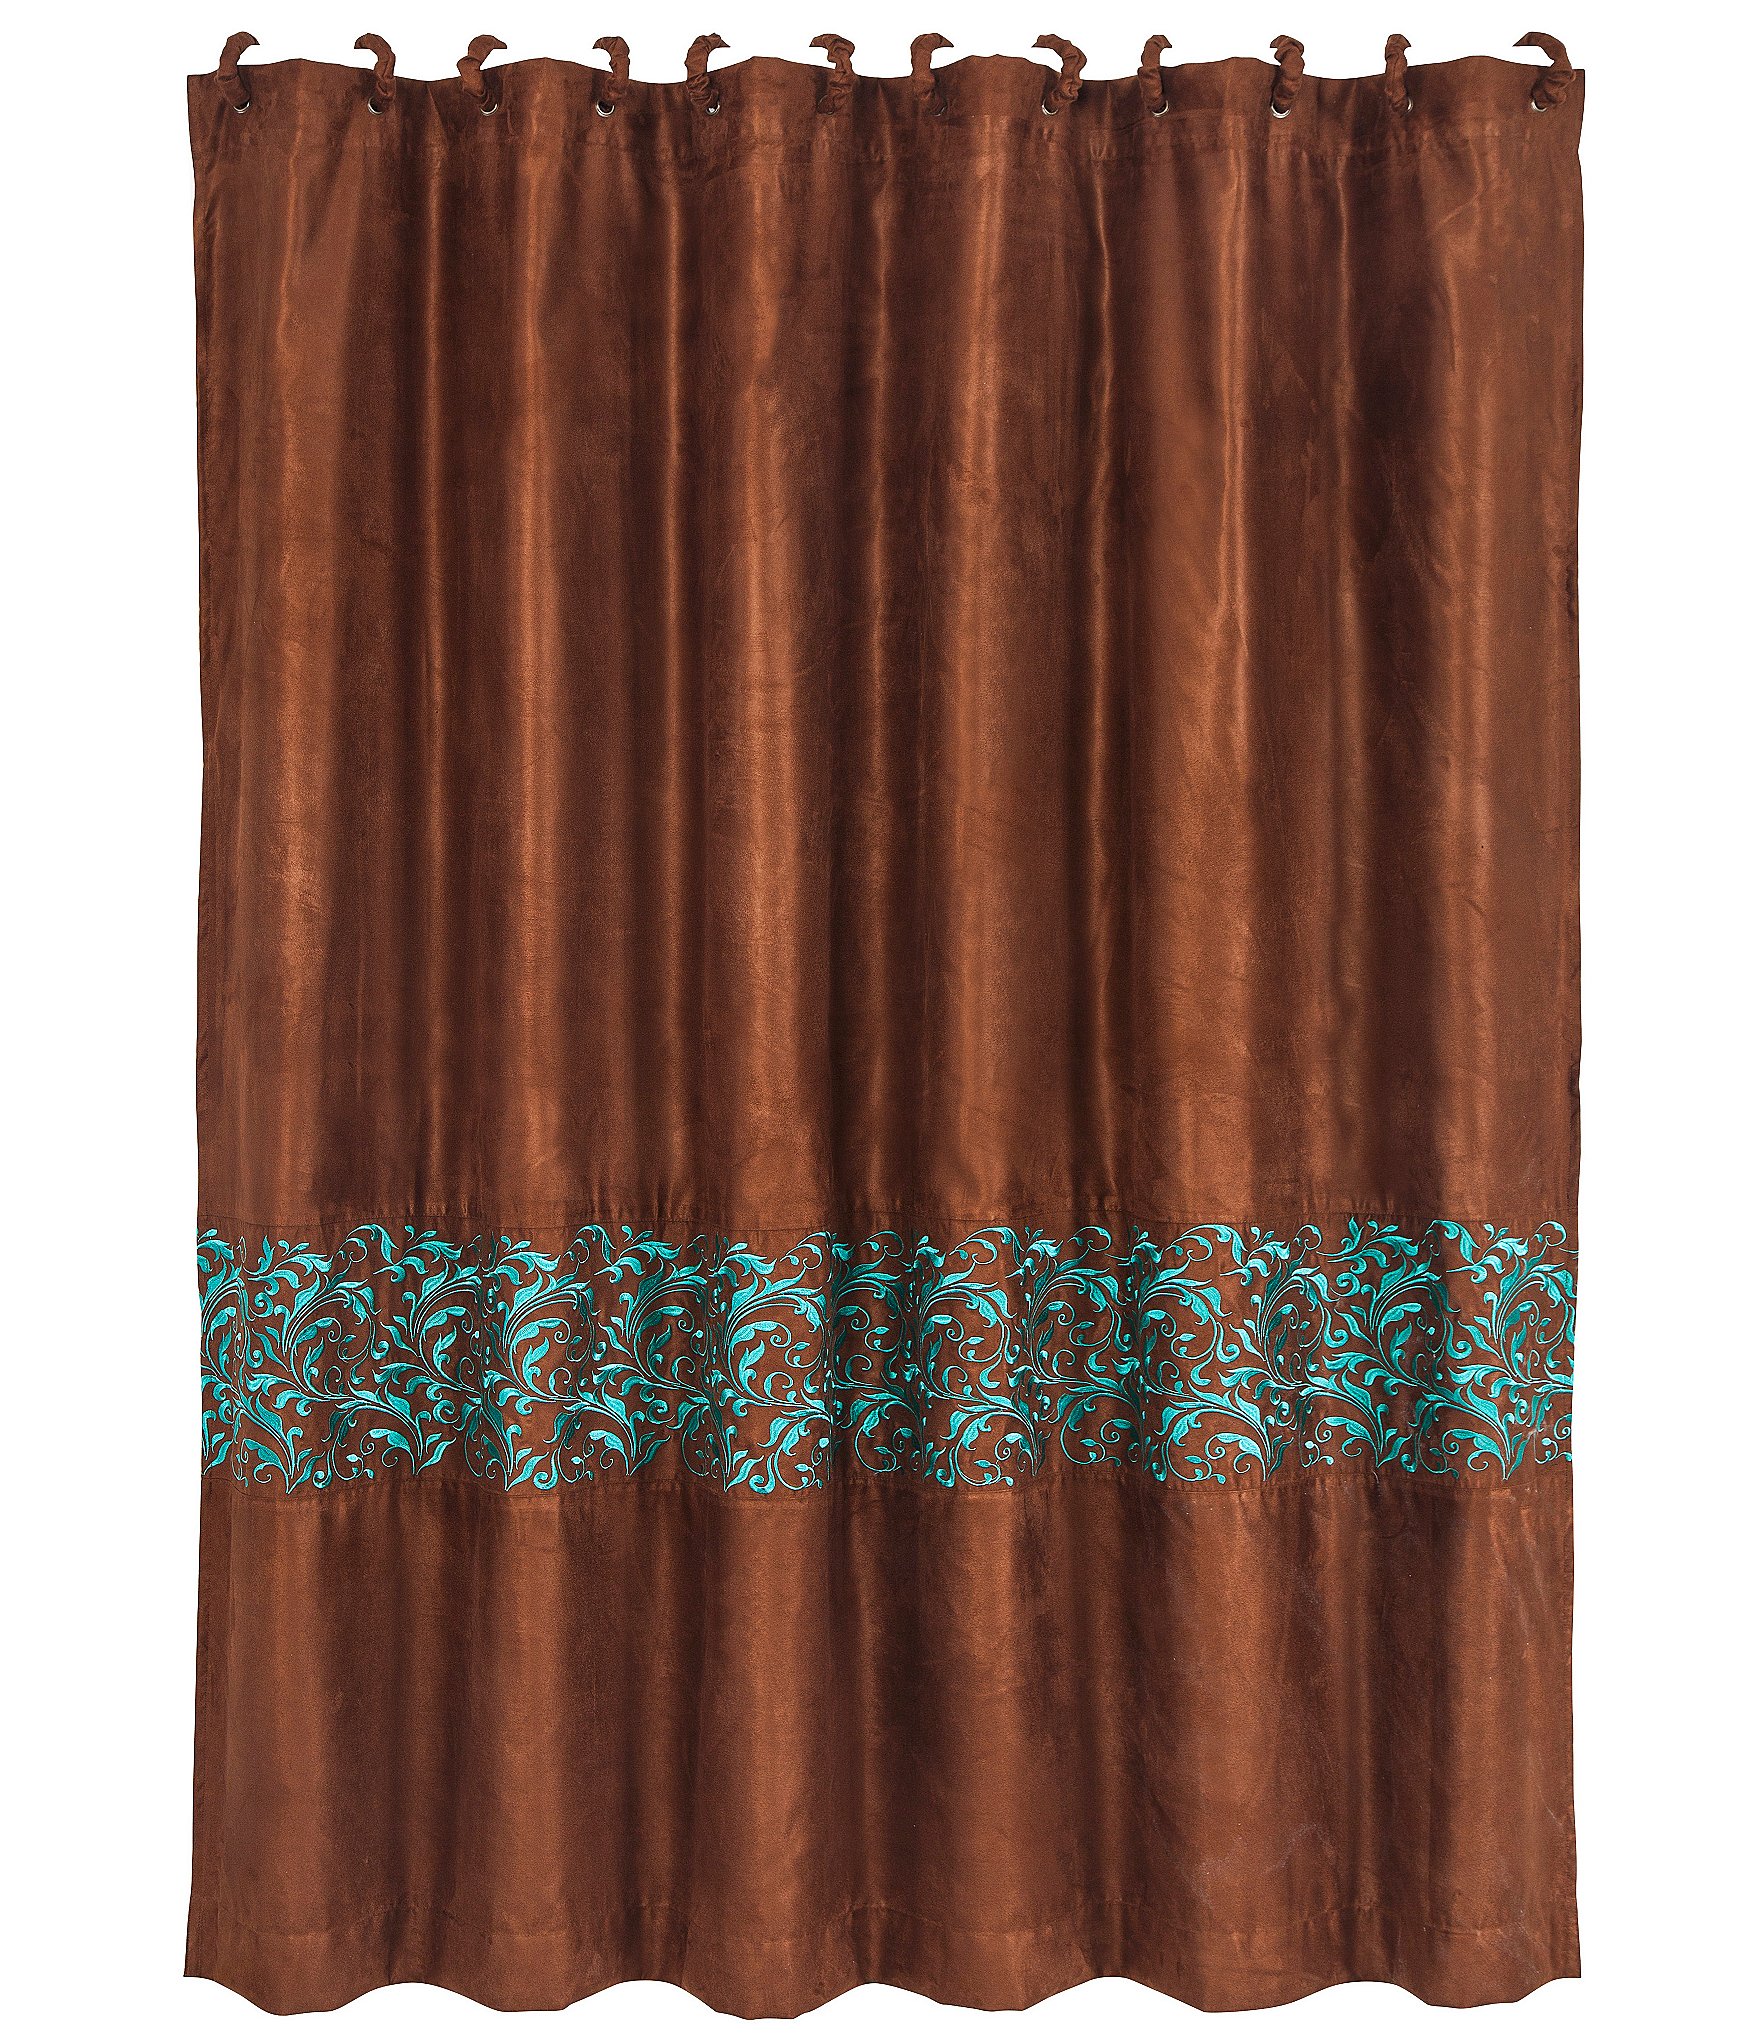 https://dimg.dillards.com/is/image/DillardsZoom/zoom/paseo-road-by-hiend-accents-wyatt-copper--turquoise-scrollwork-shower-curtain/00000000_zi_e57c9163-2ed2-4146-a046-dd9edc5f1626.jpg